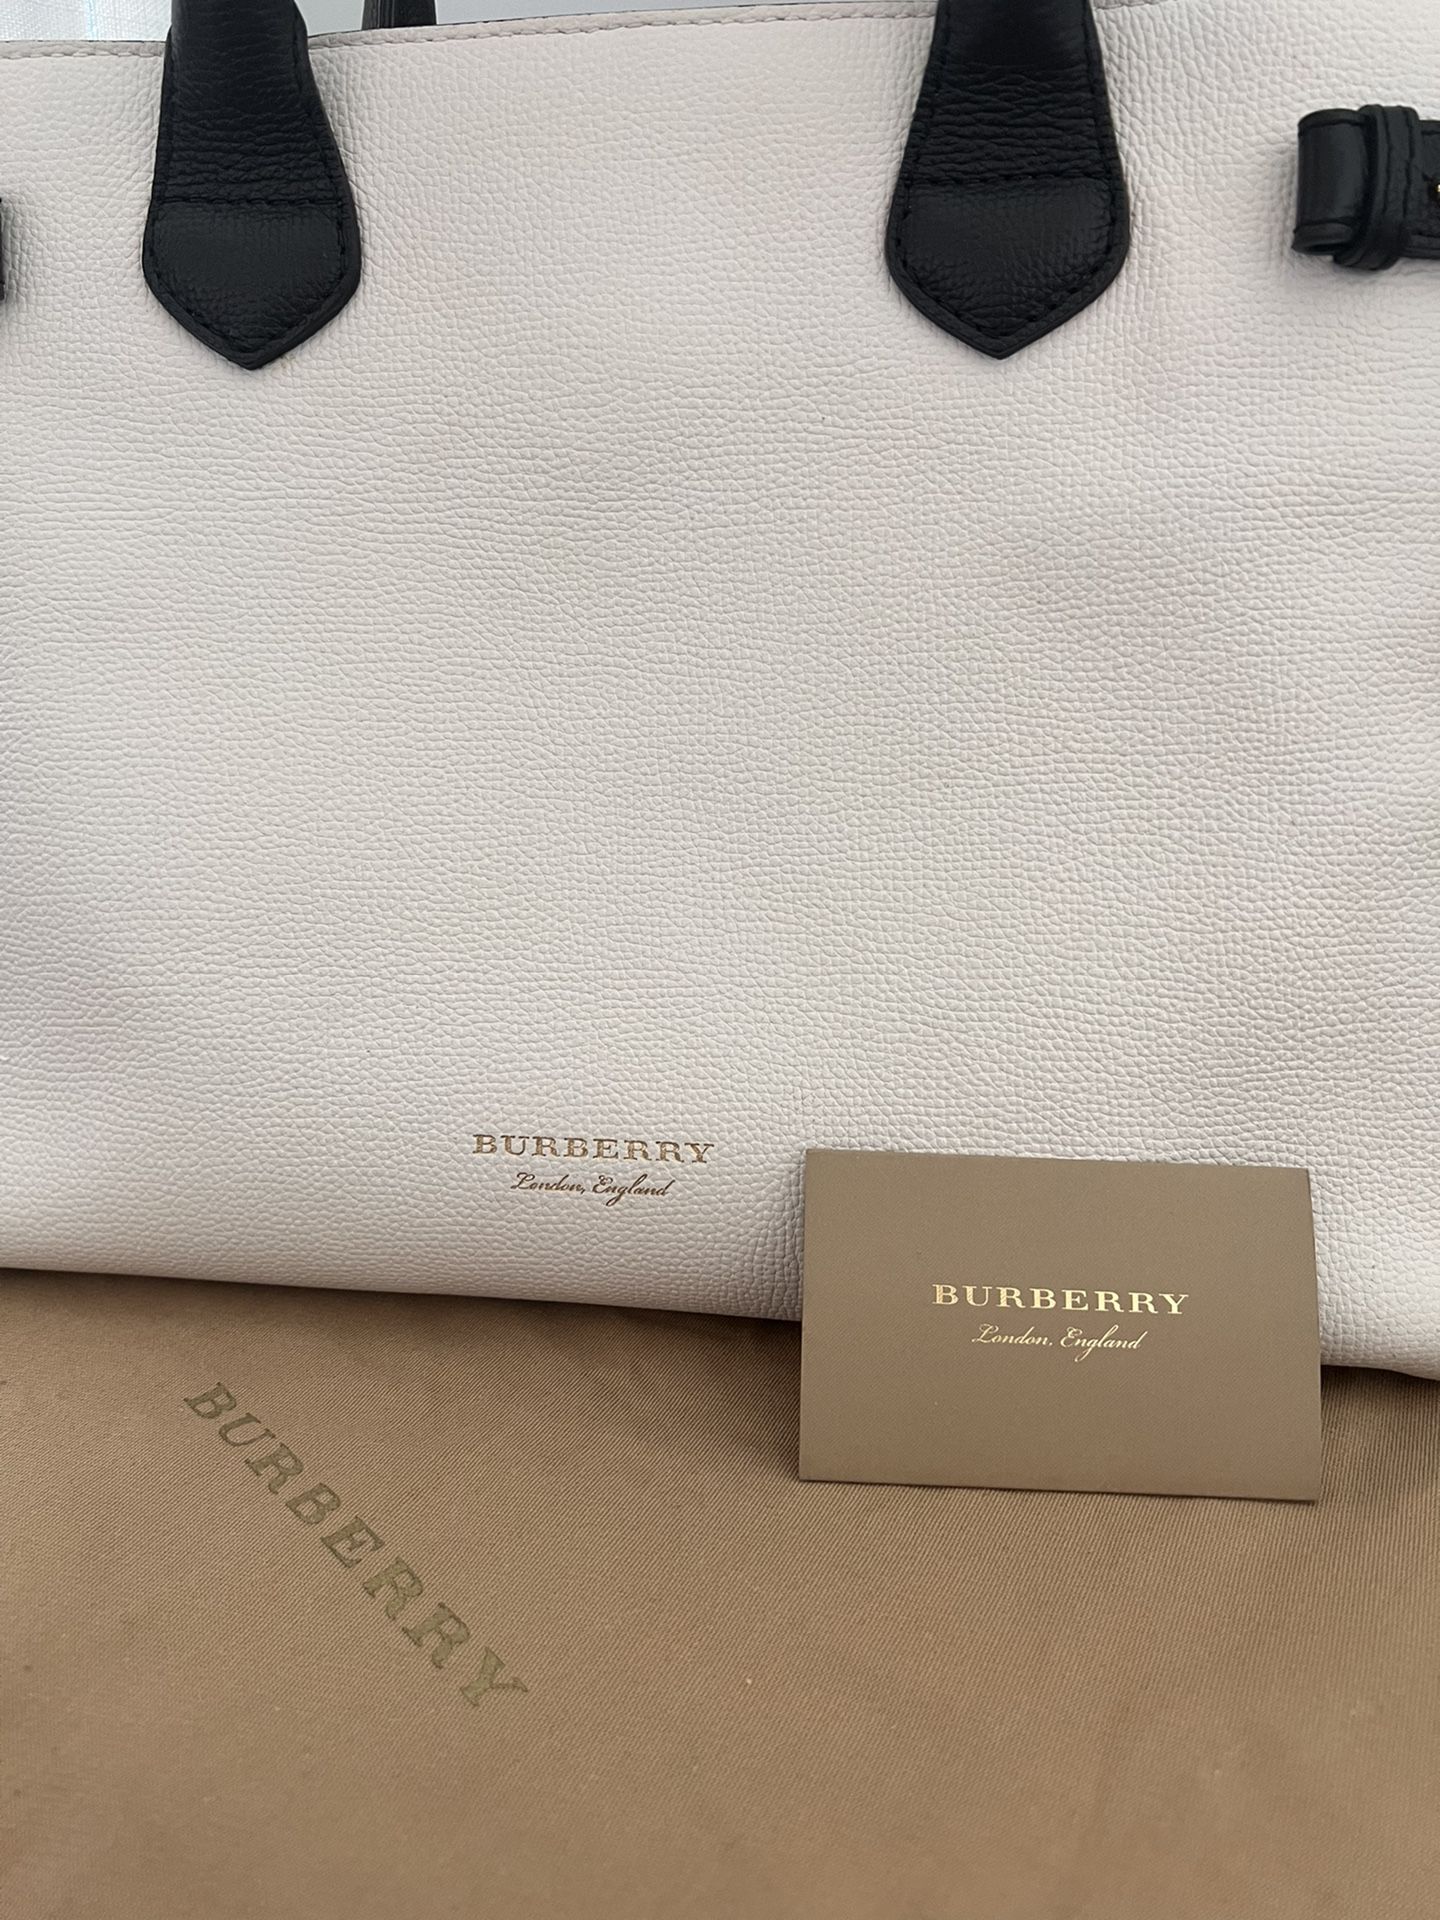 Authentic Burberry Top Handle Bag 